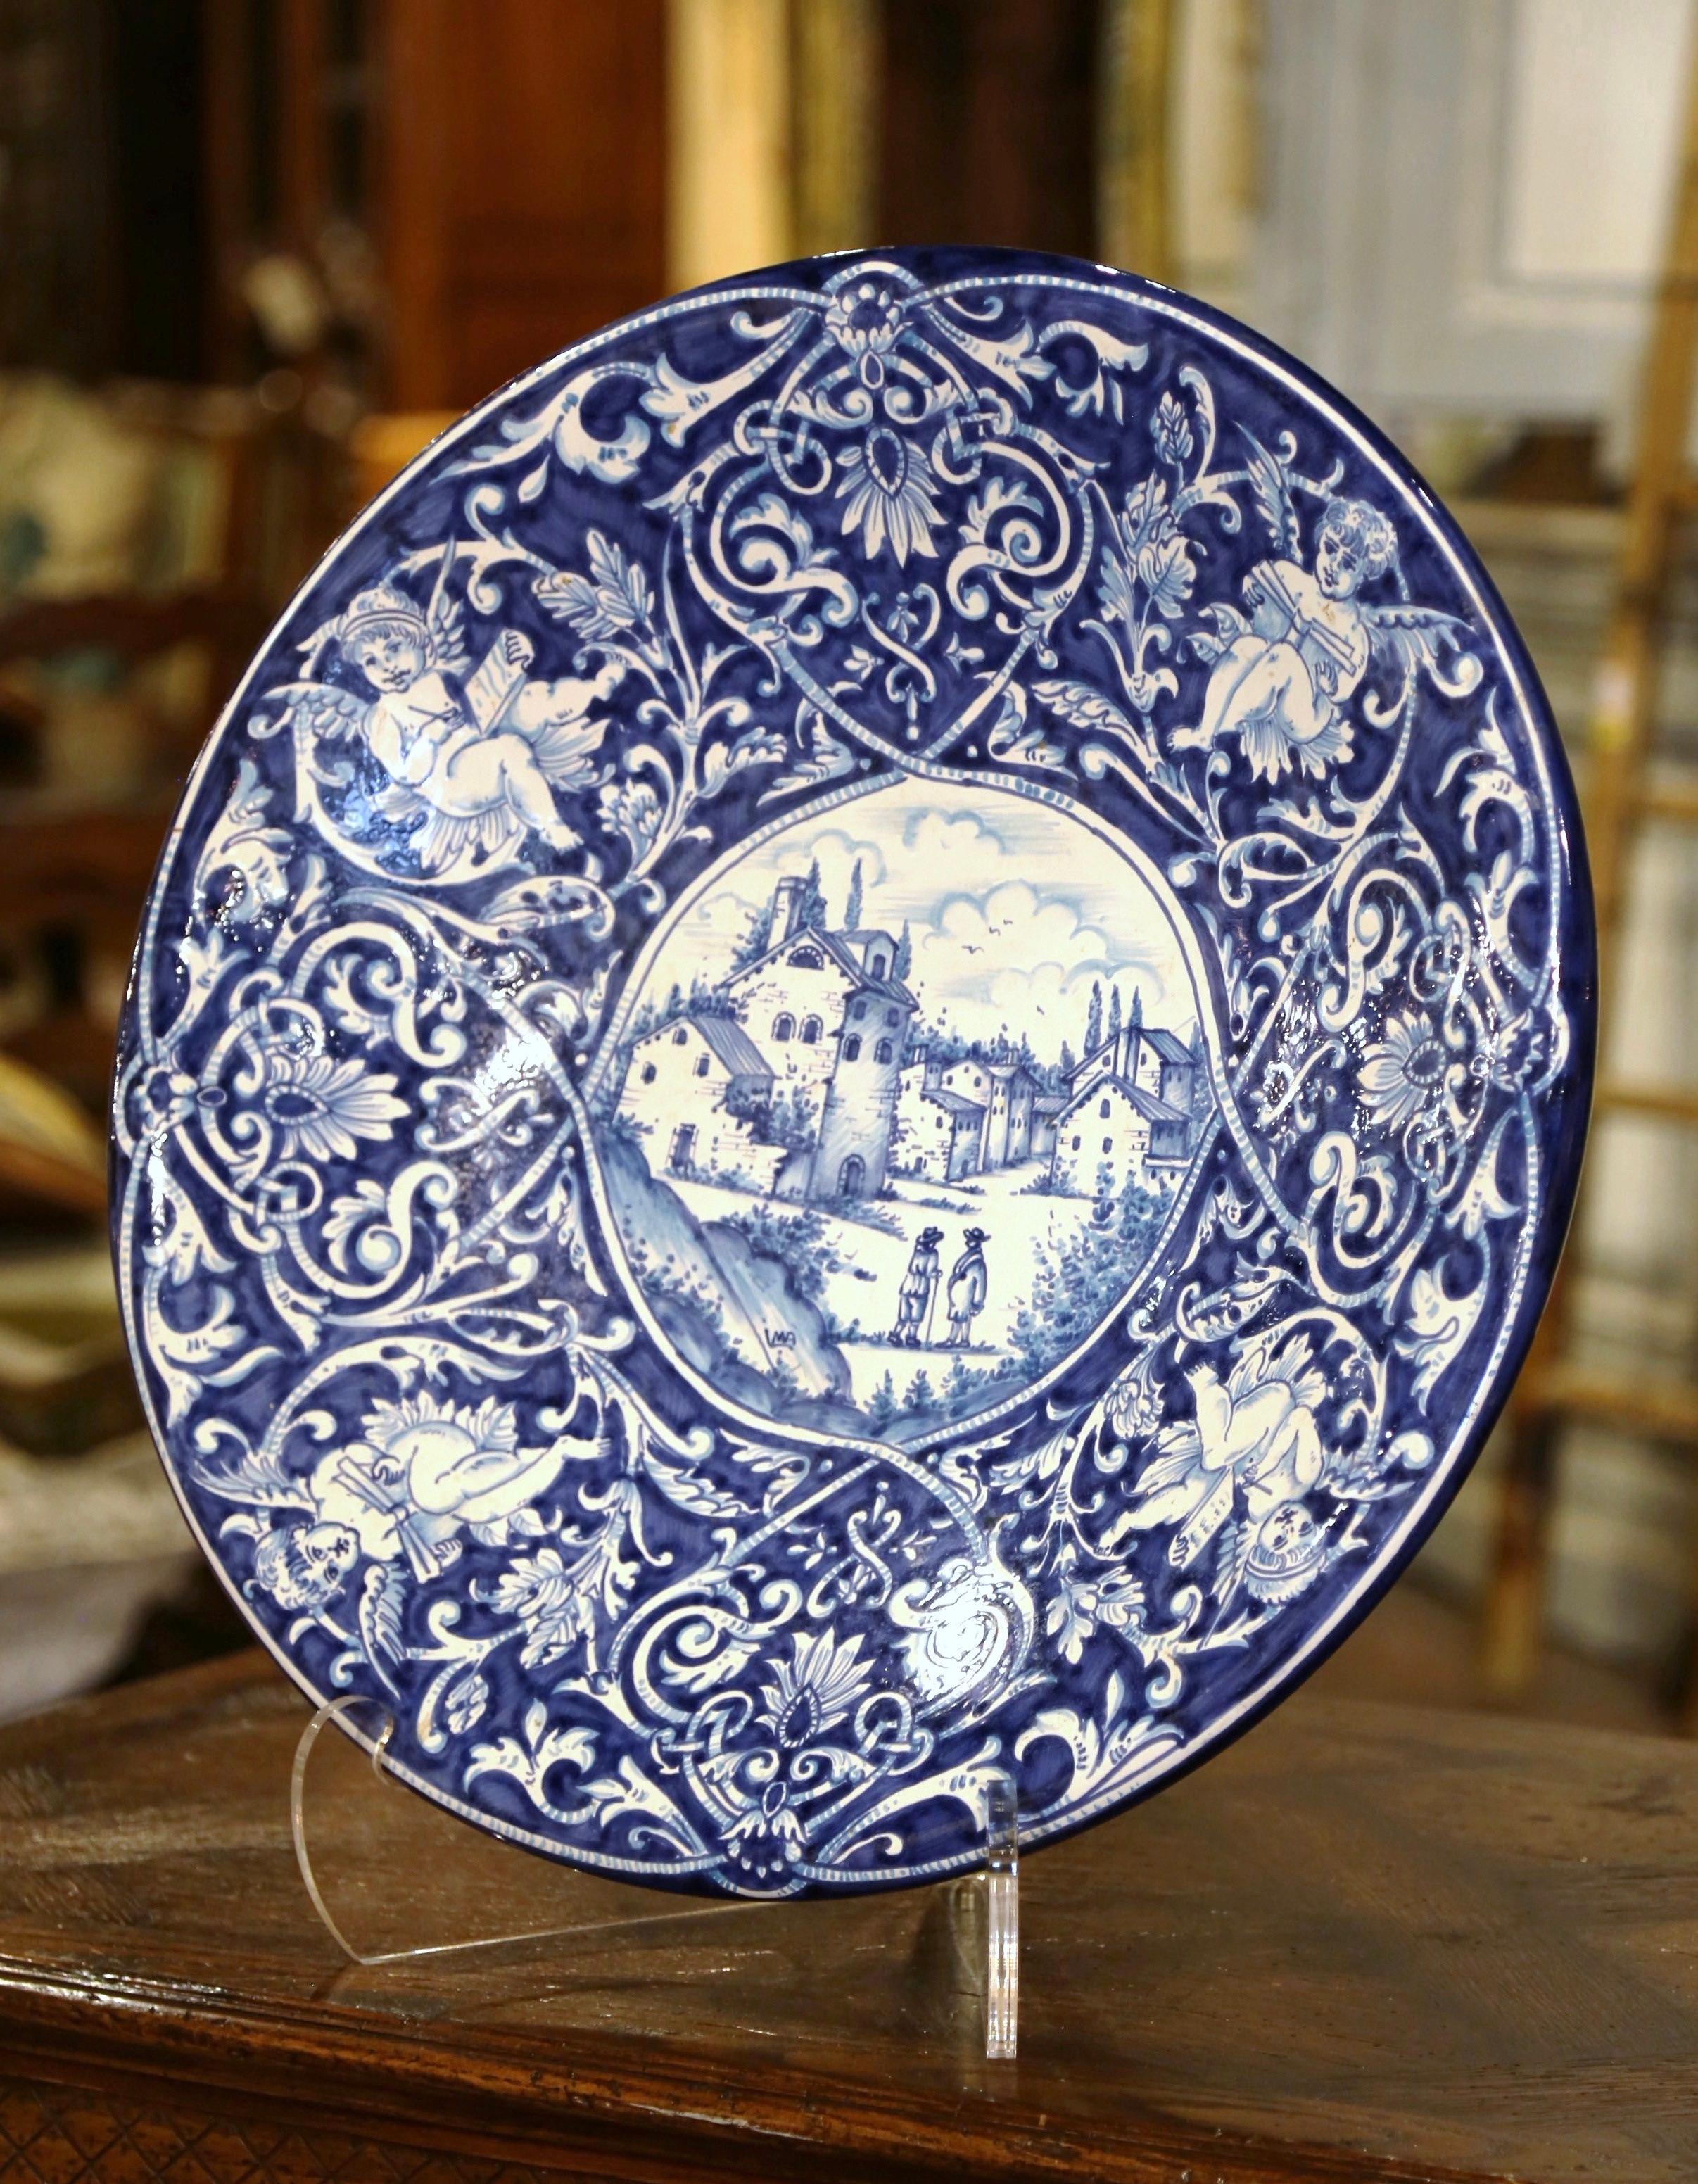 This large antique circular charger was crafted in Italy, circa 1960. The important ceramic wall hanging plate depicts a outdoor pastoral scene with peasants talking in a village with farmhouses around. The border is further embellished with cherub